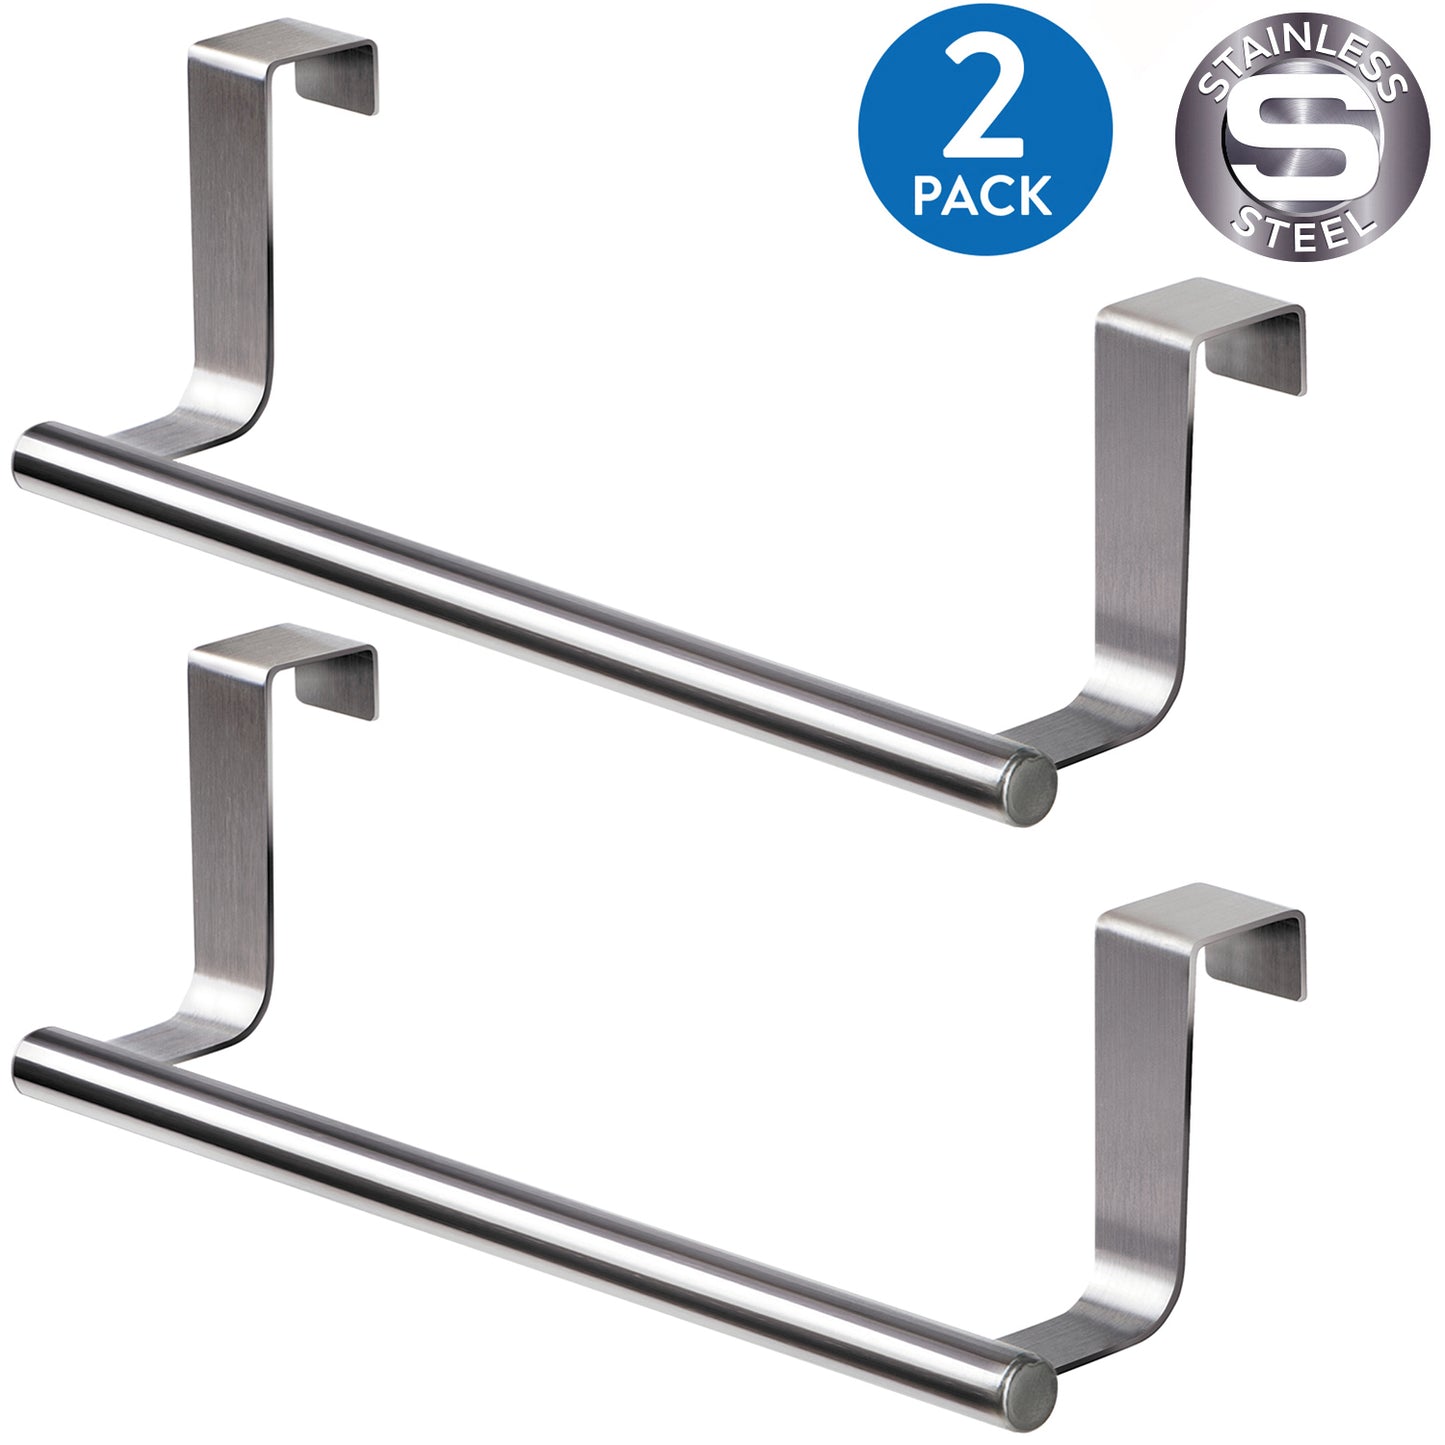 2 Pack, Over the Door Towel Rail, Stainless Steel, Towel Holder with Anti-Slip Scratch-Protecting Stripe